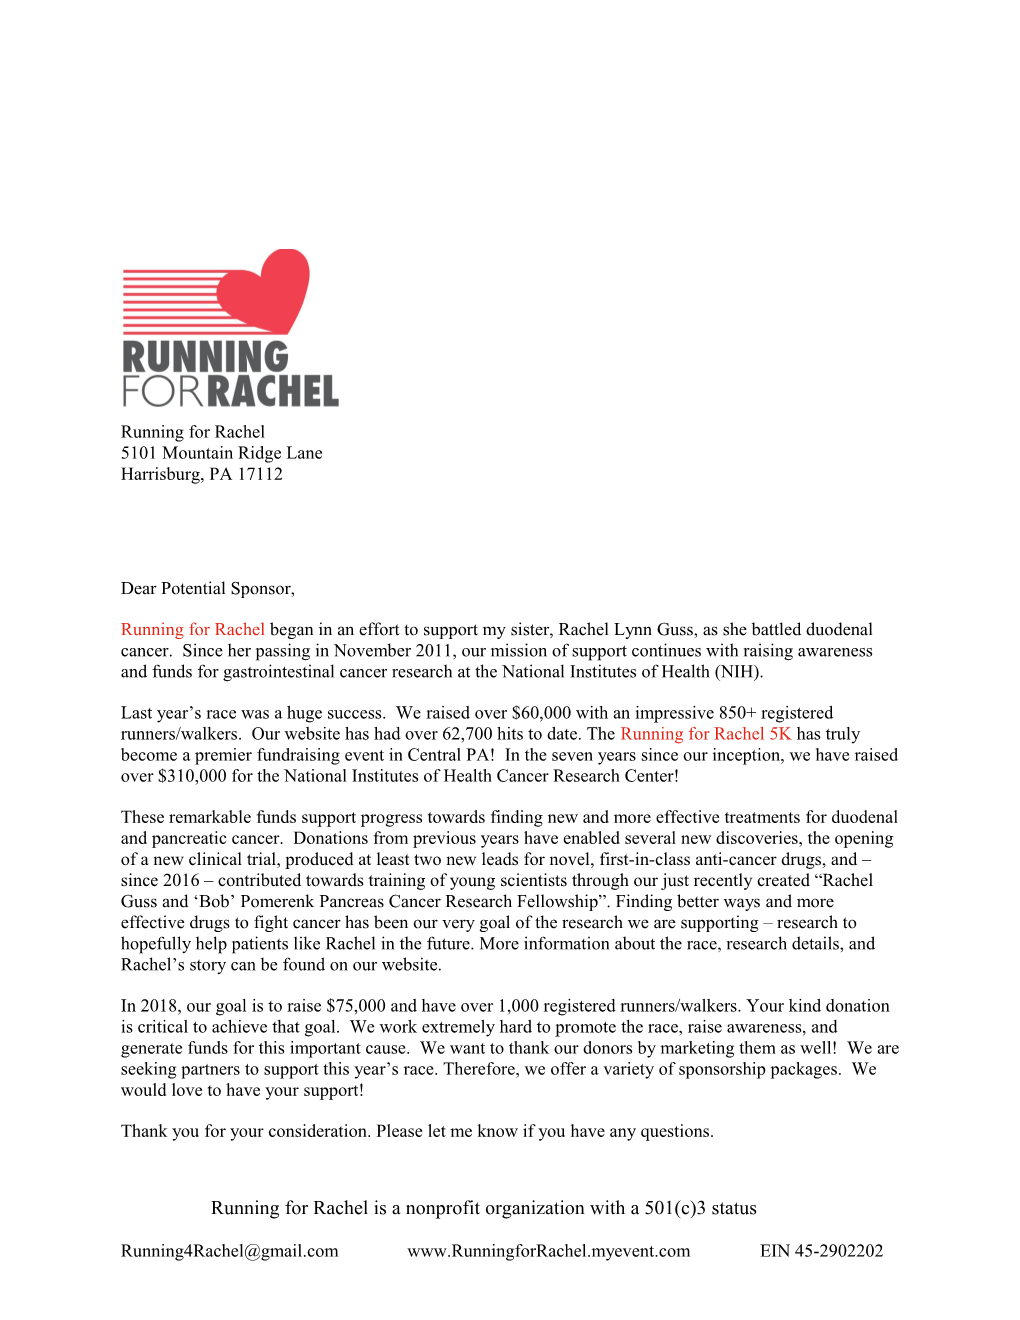 Running for Rachel Is a Nonprofit Organization with a 501(C)3 Status